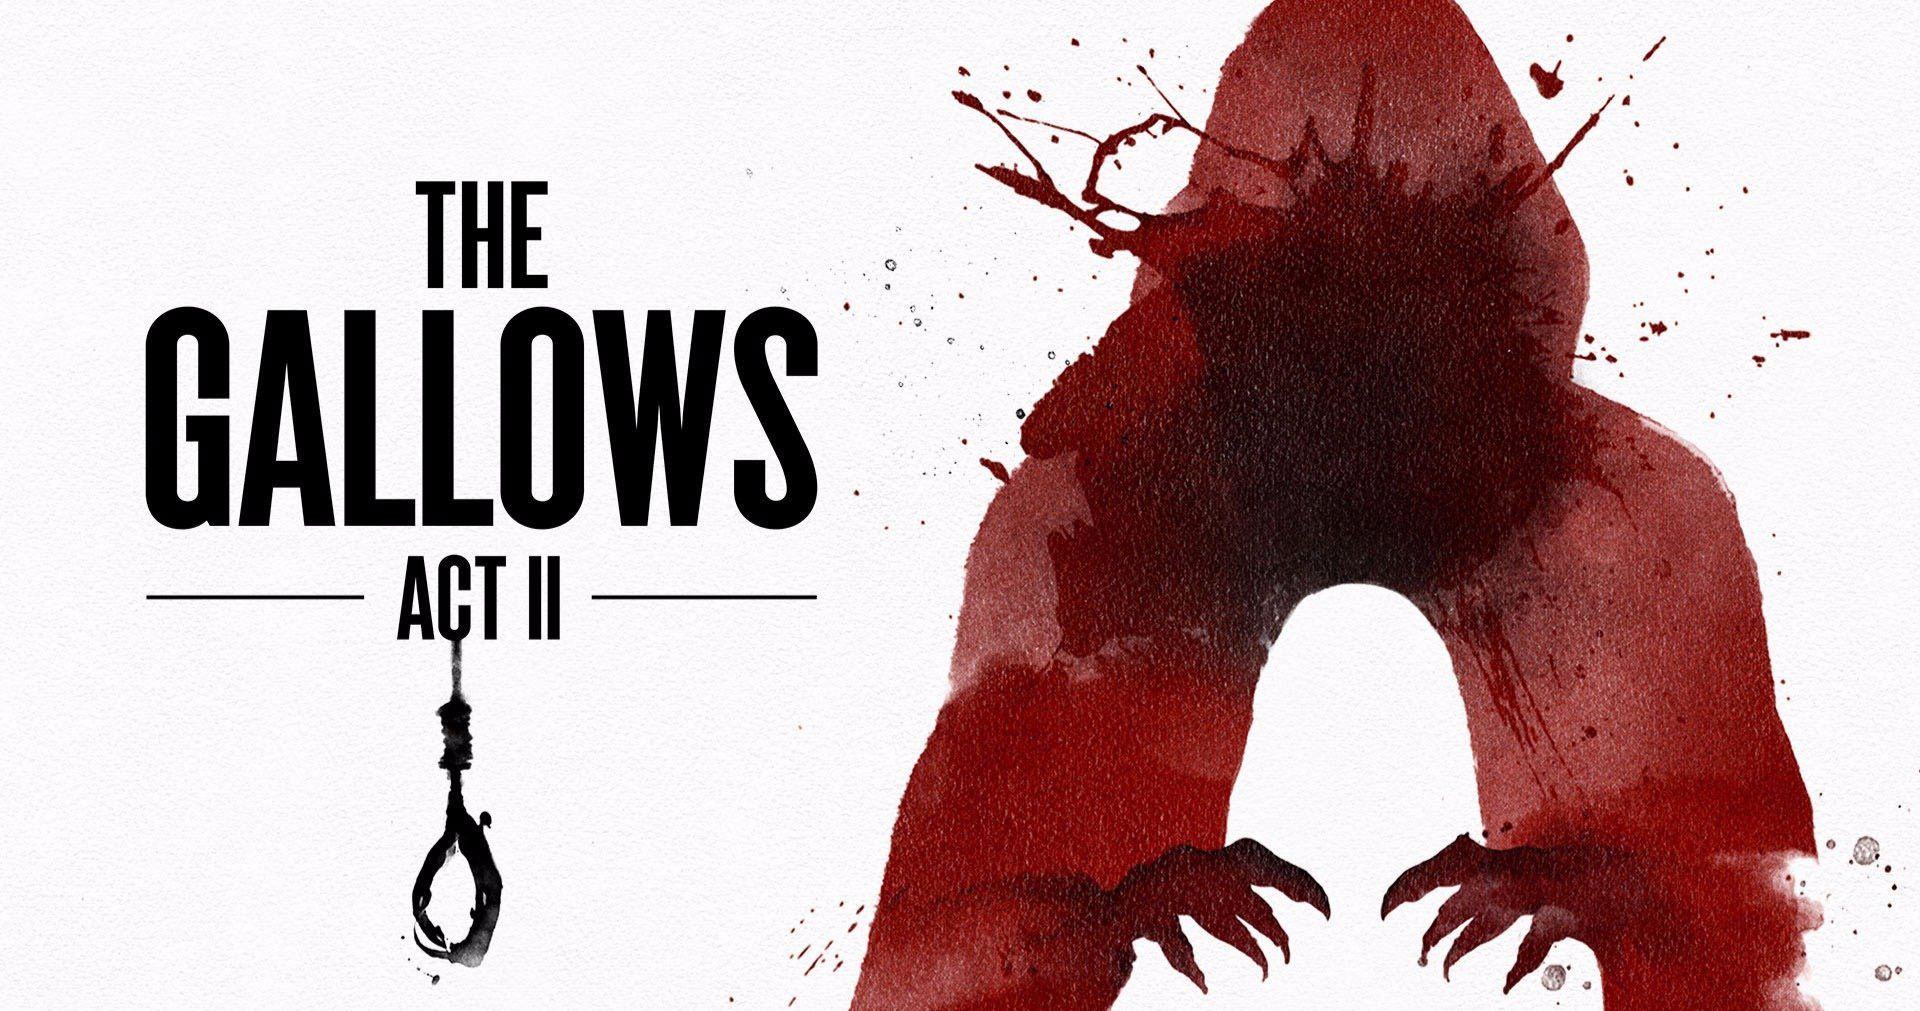 The Gallows Act II Arrives on Blu-Ray This Christmas with Delete Scenes